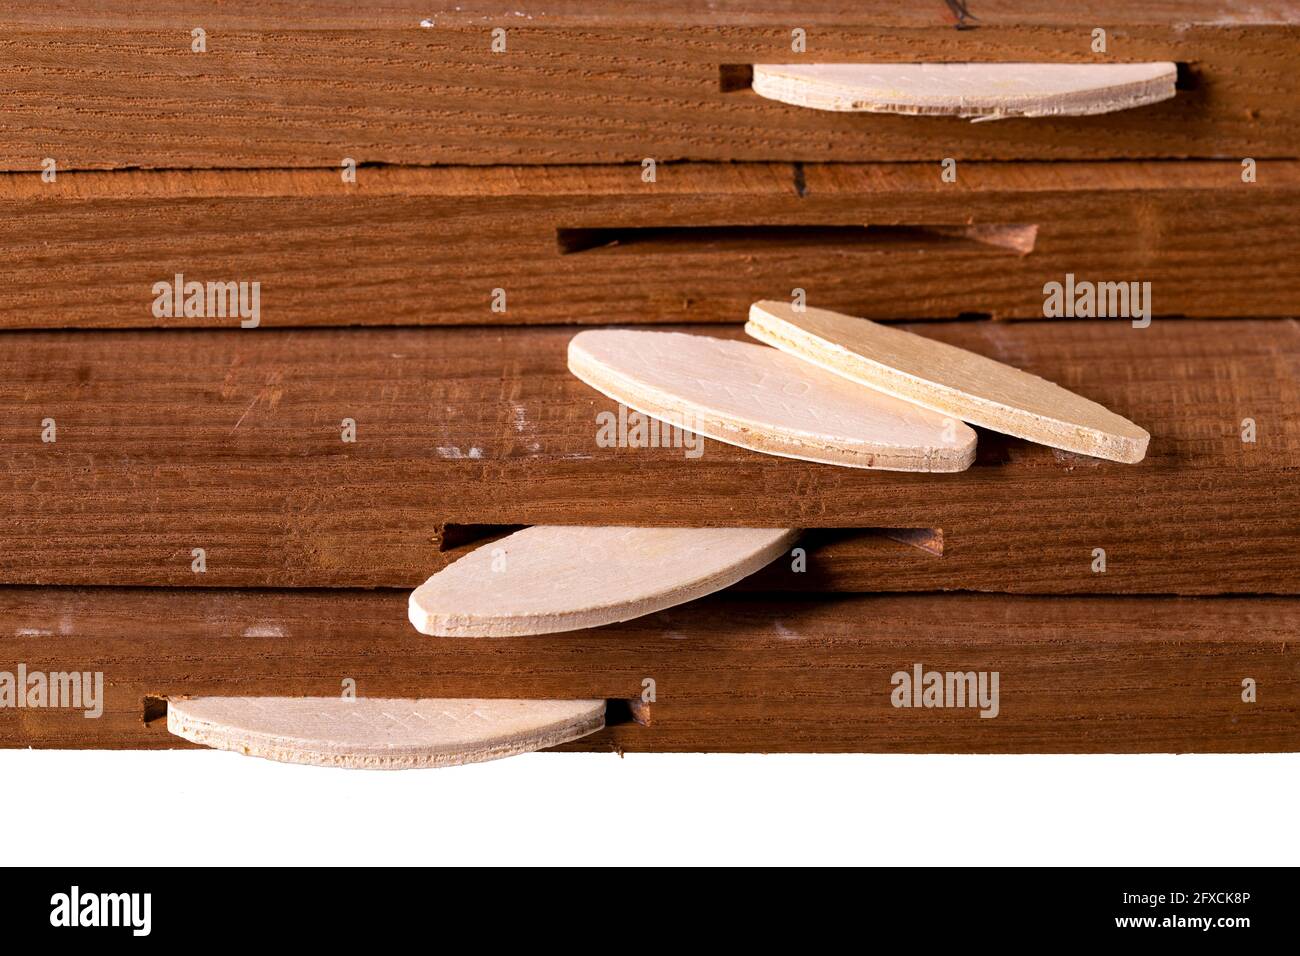 Connecting colored ash planks with lamellas. Pieces of wood prepared for gluing with carpentry glue. Isolated background. Stock Photo